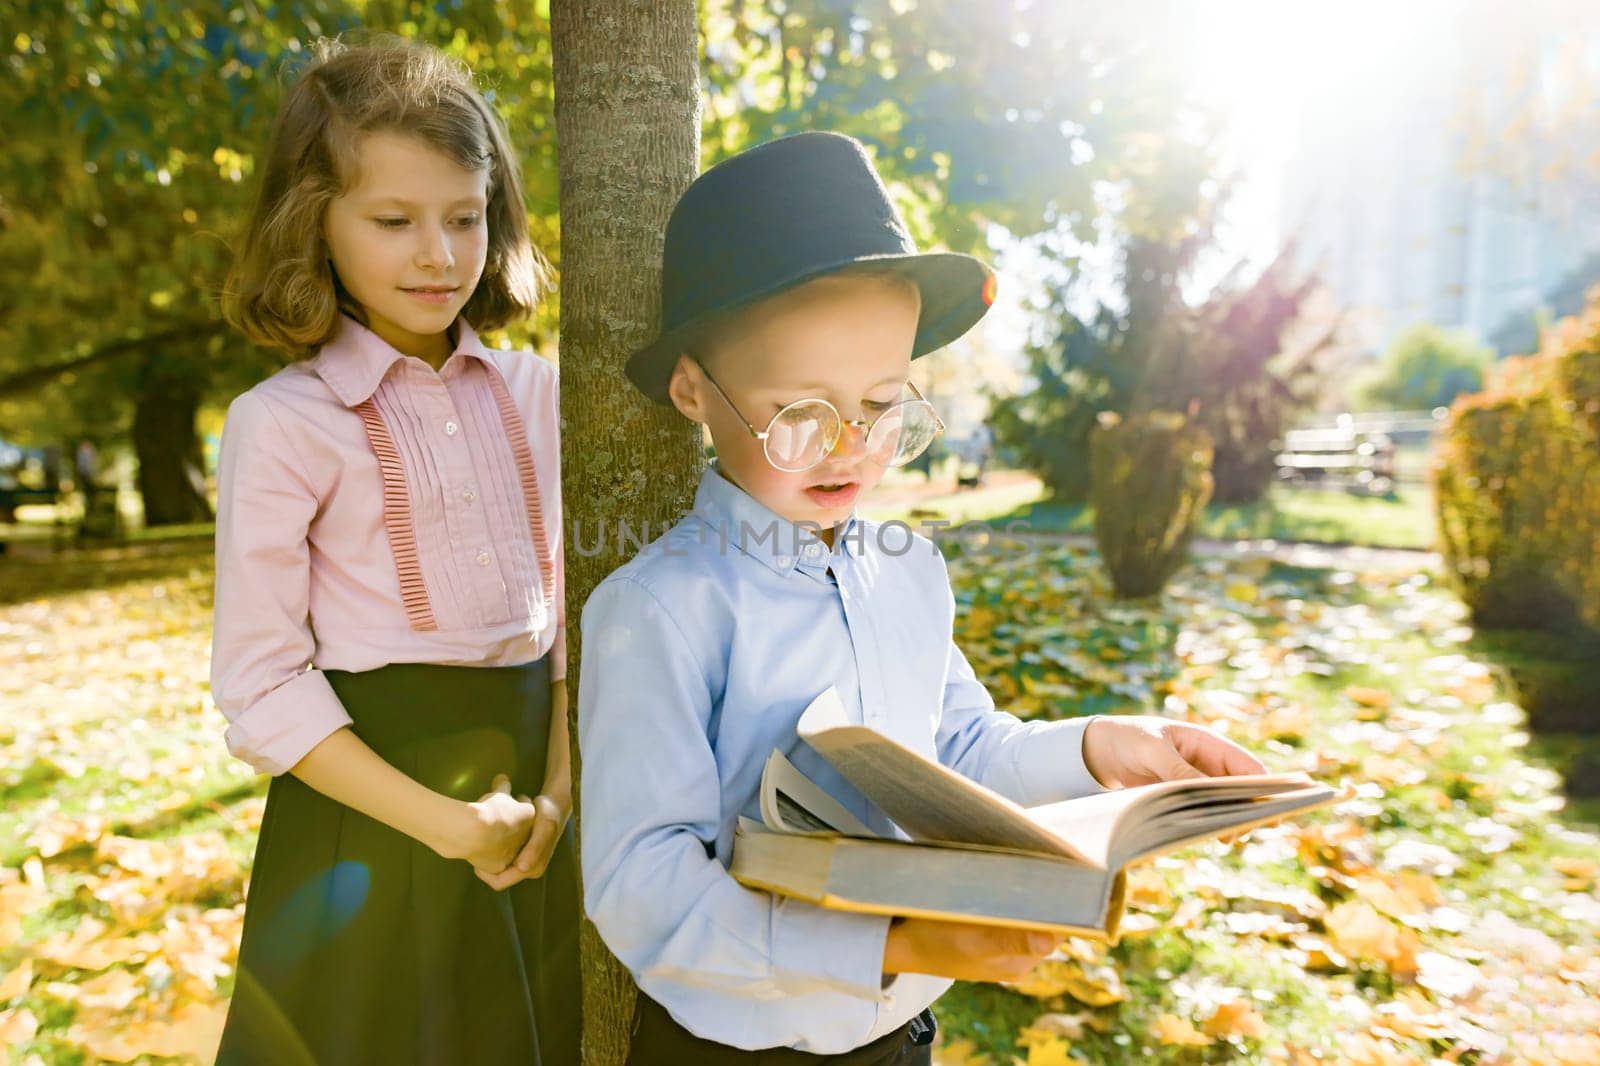 Little boy 6,7 years old with hat, glasses, reading book and girl 7,8 years old, together in autumn sunny park, golden hour